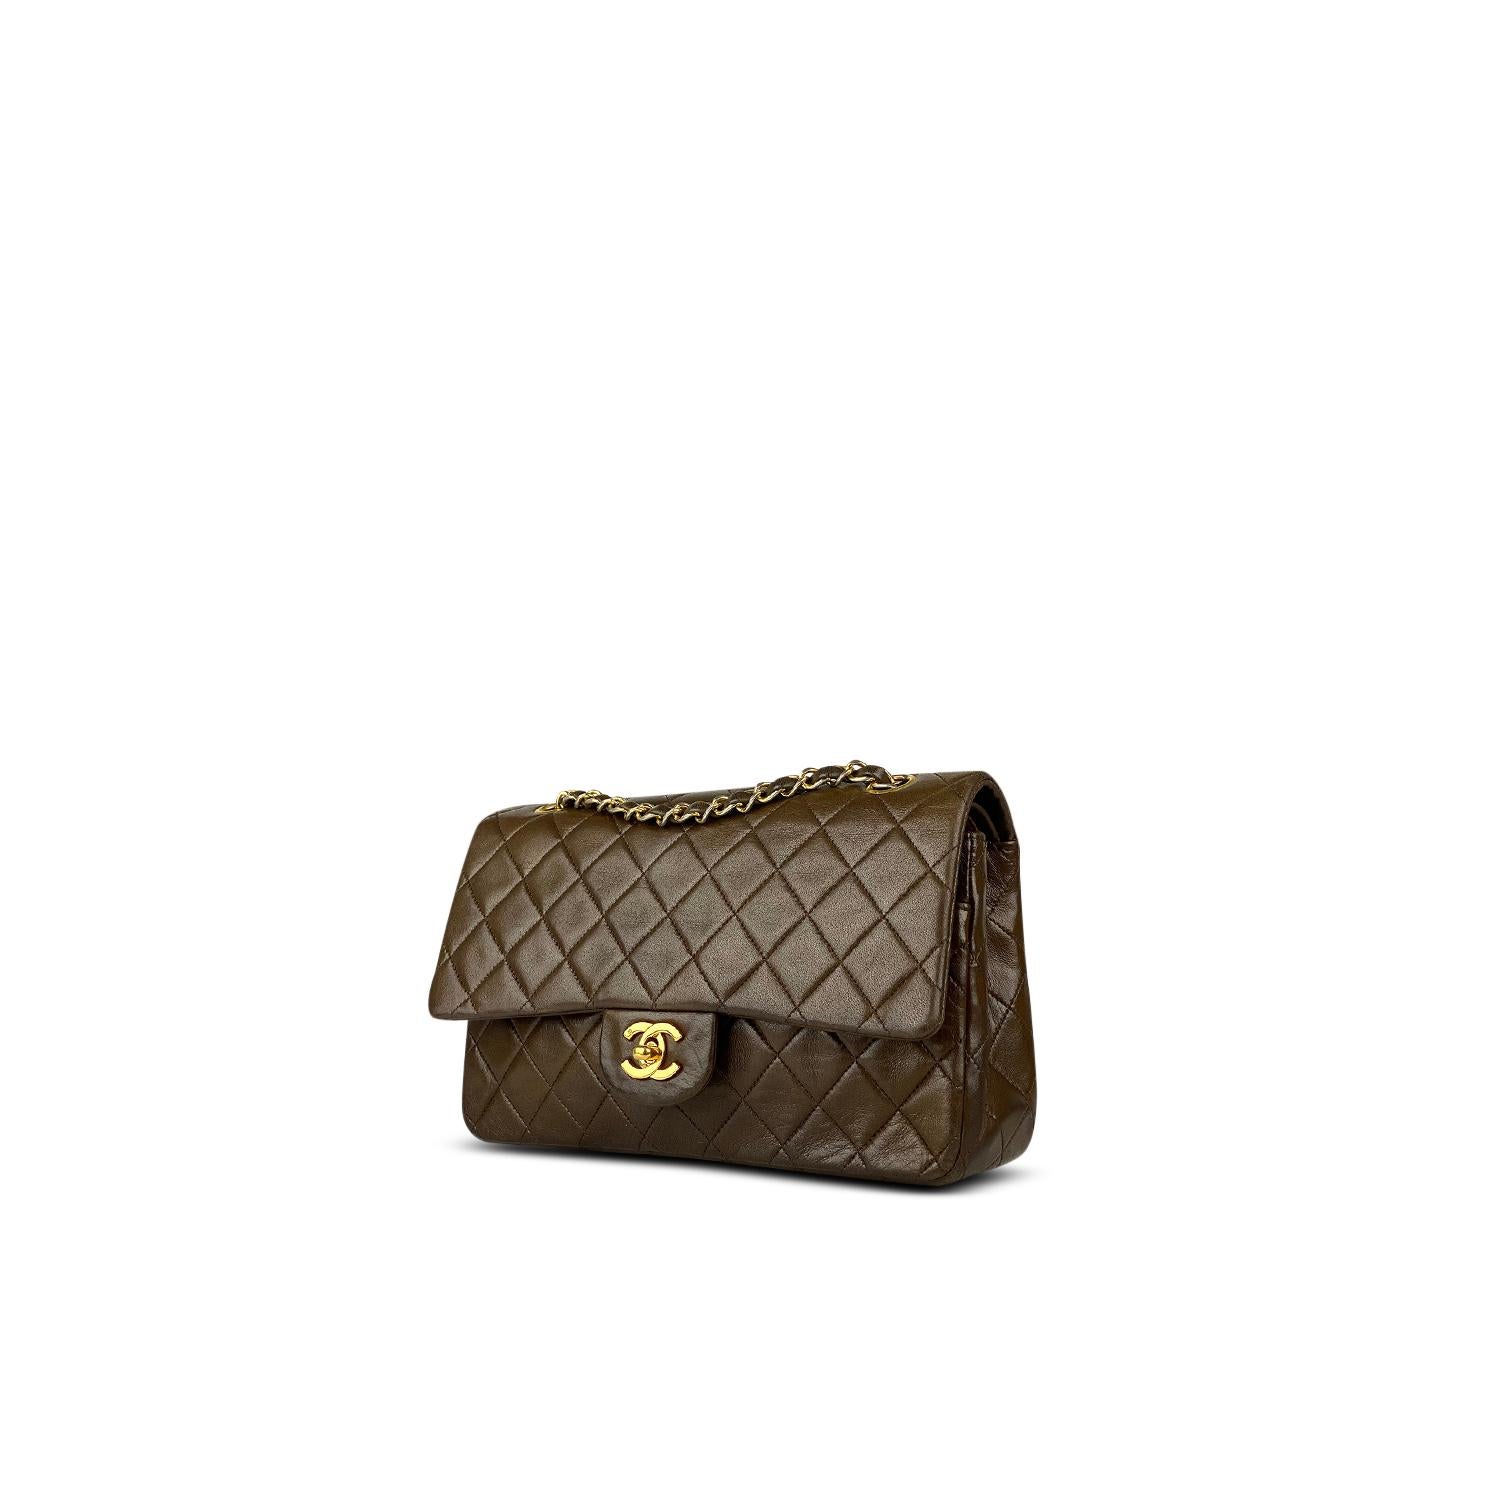 Brown quilted lamb leather Chanel medium Classic/Timeless Double Flap bag with

– Gold-tone hardware
– Convertible chain-link and leather shoulder strap
– Tonal leather lining
– Single patch pocket at back
– Single zip pocket at flap underside,